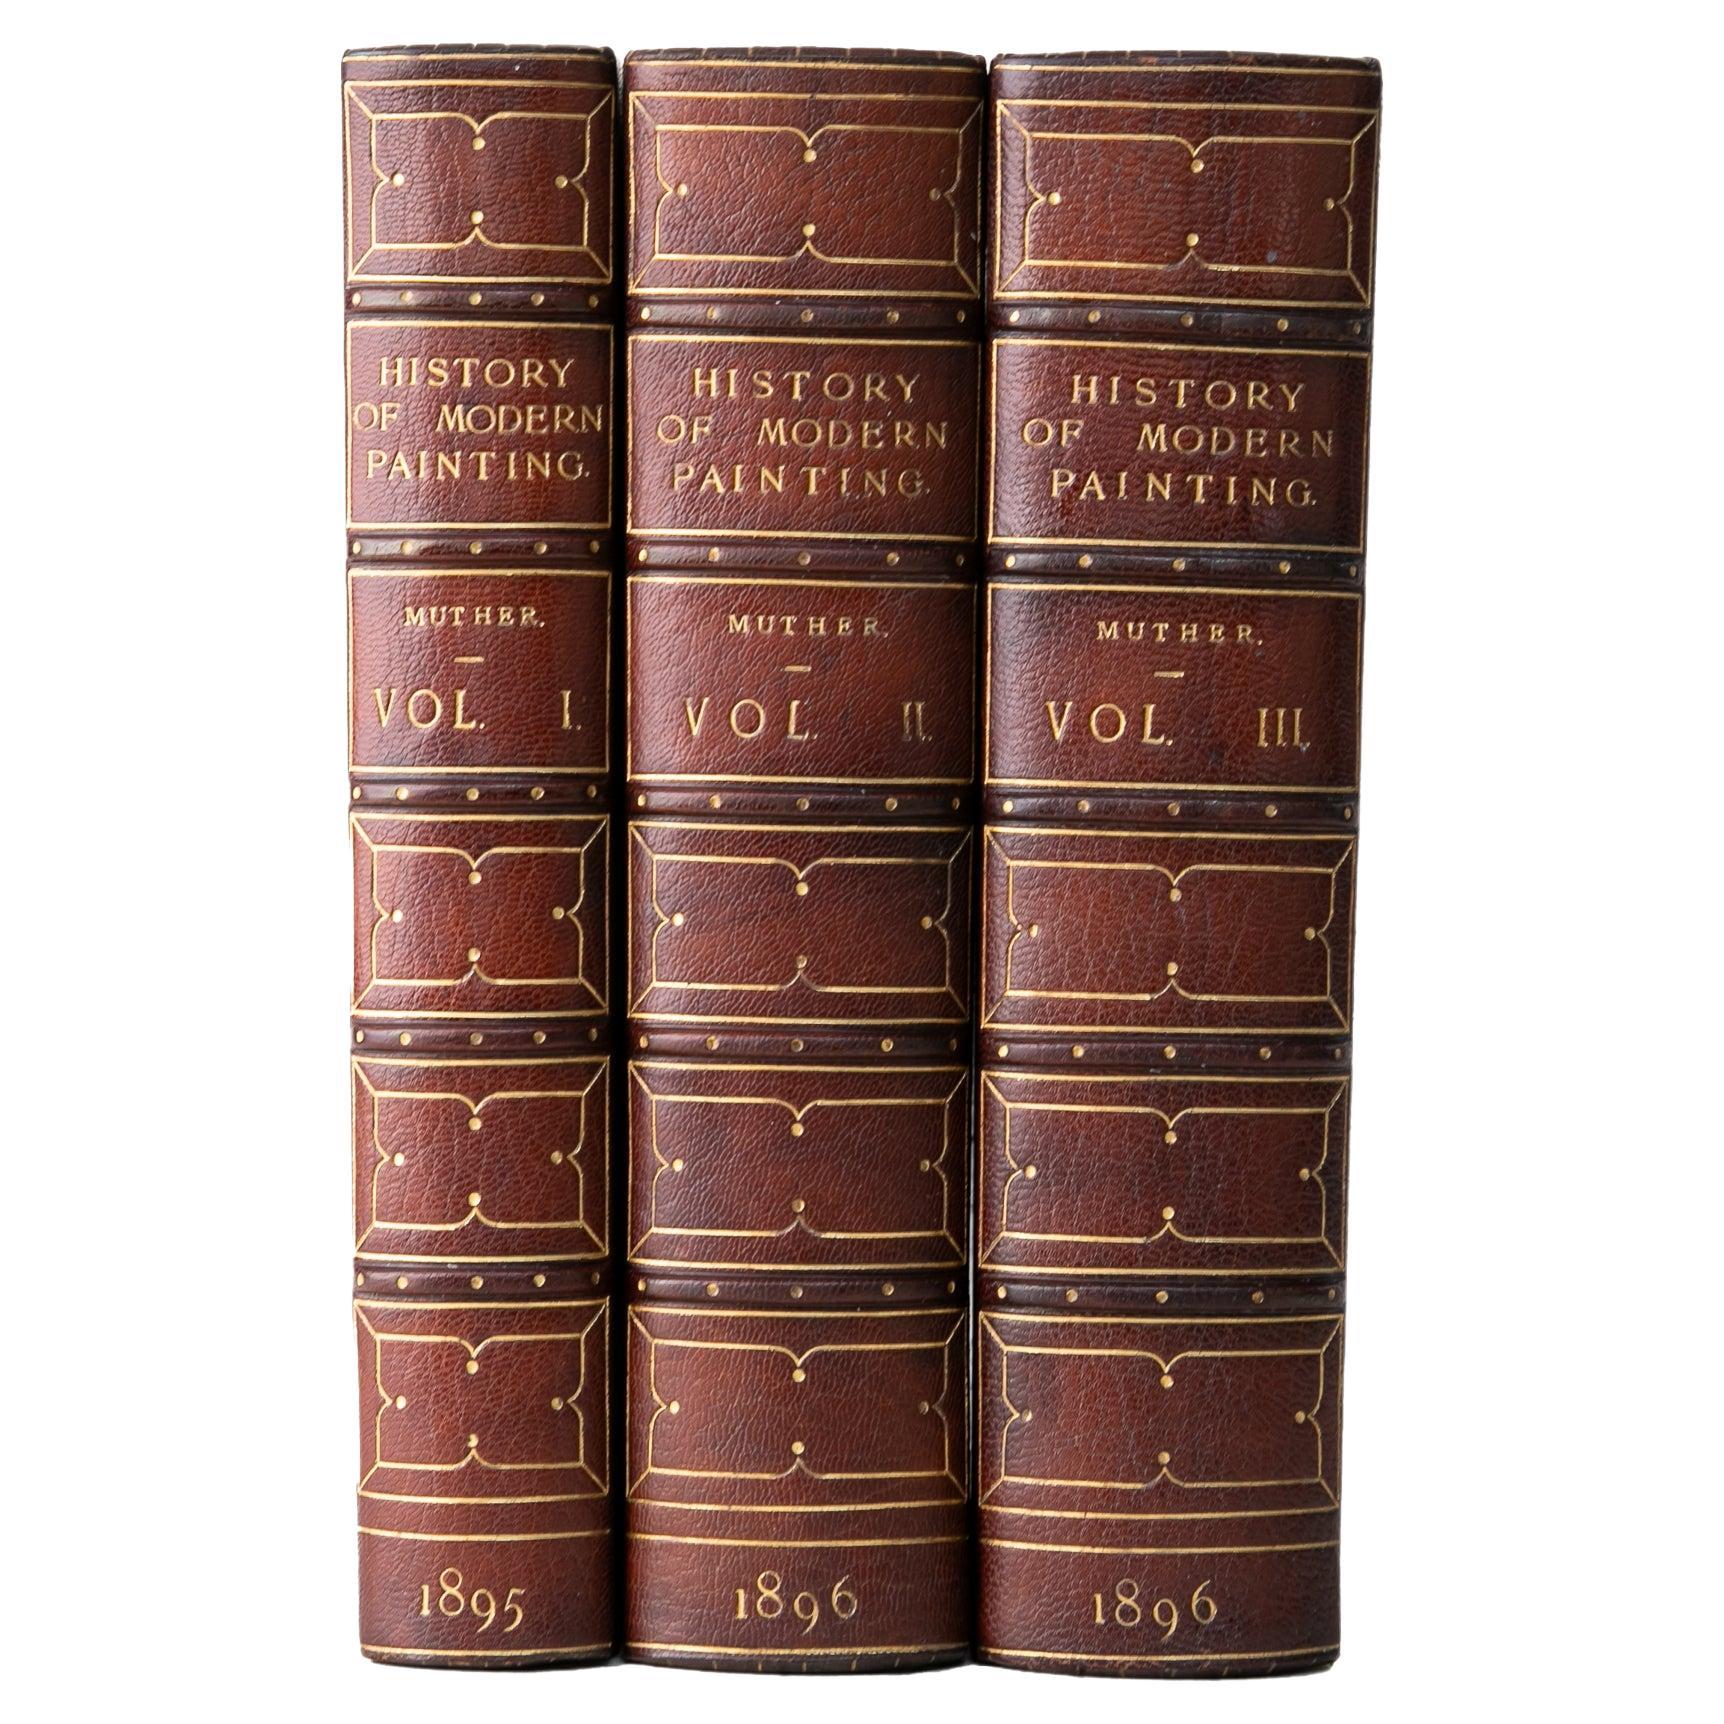 3 Volumes. Richard Muther, The History of Modern Painting 